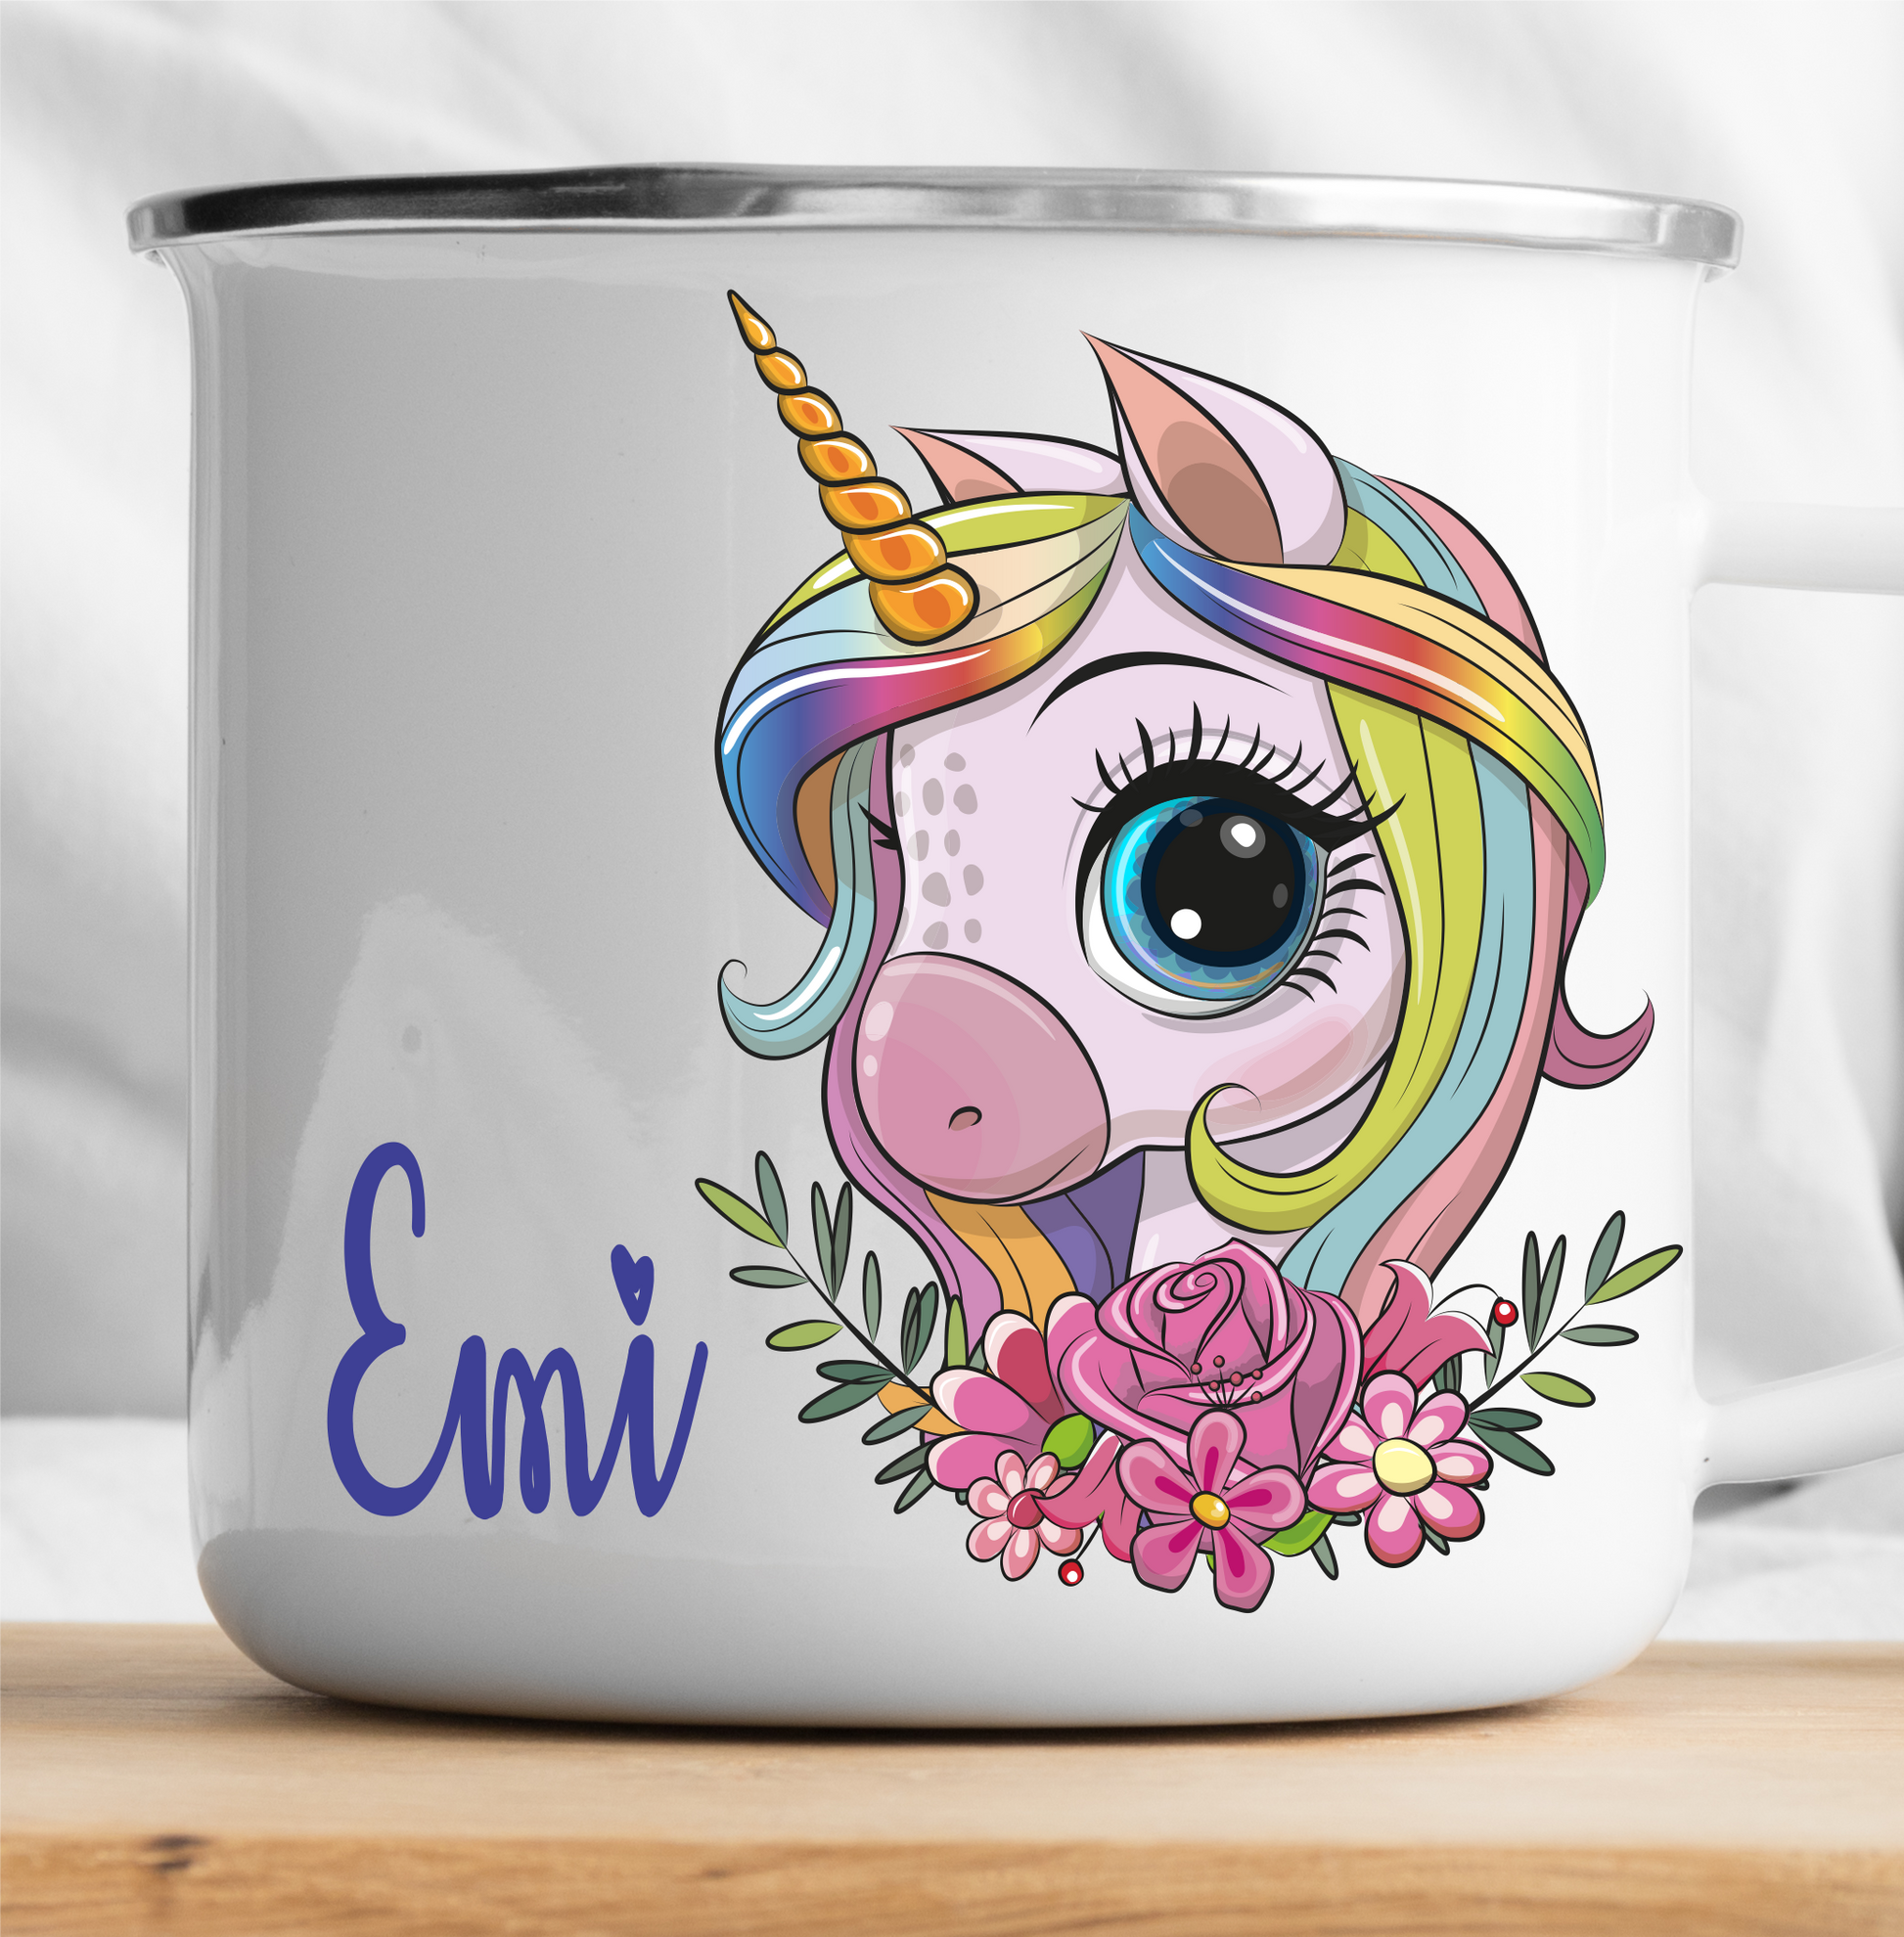 Get trendy with Personalized Unicorn9 Mug -  available at cutegifts.eu. Grab yours for $15.90 today!